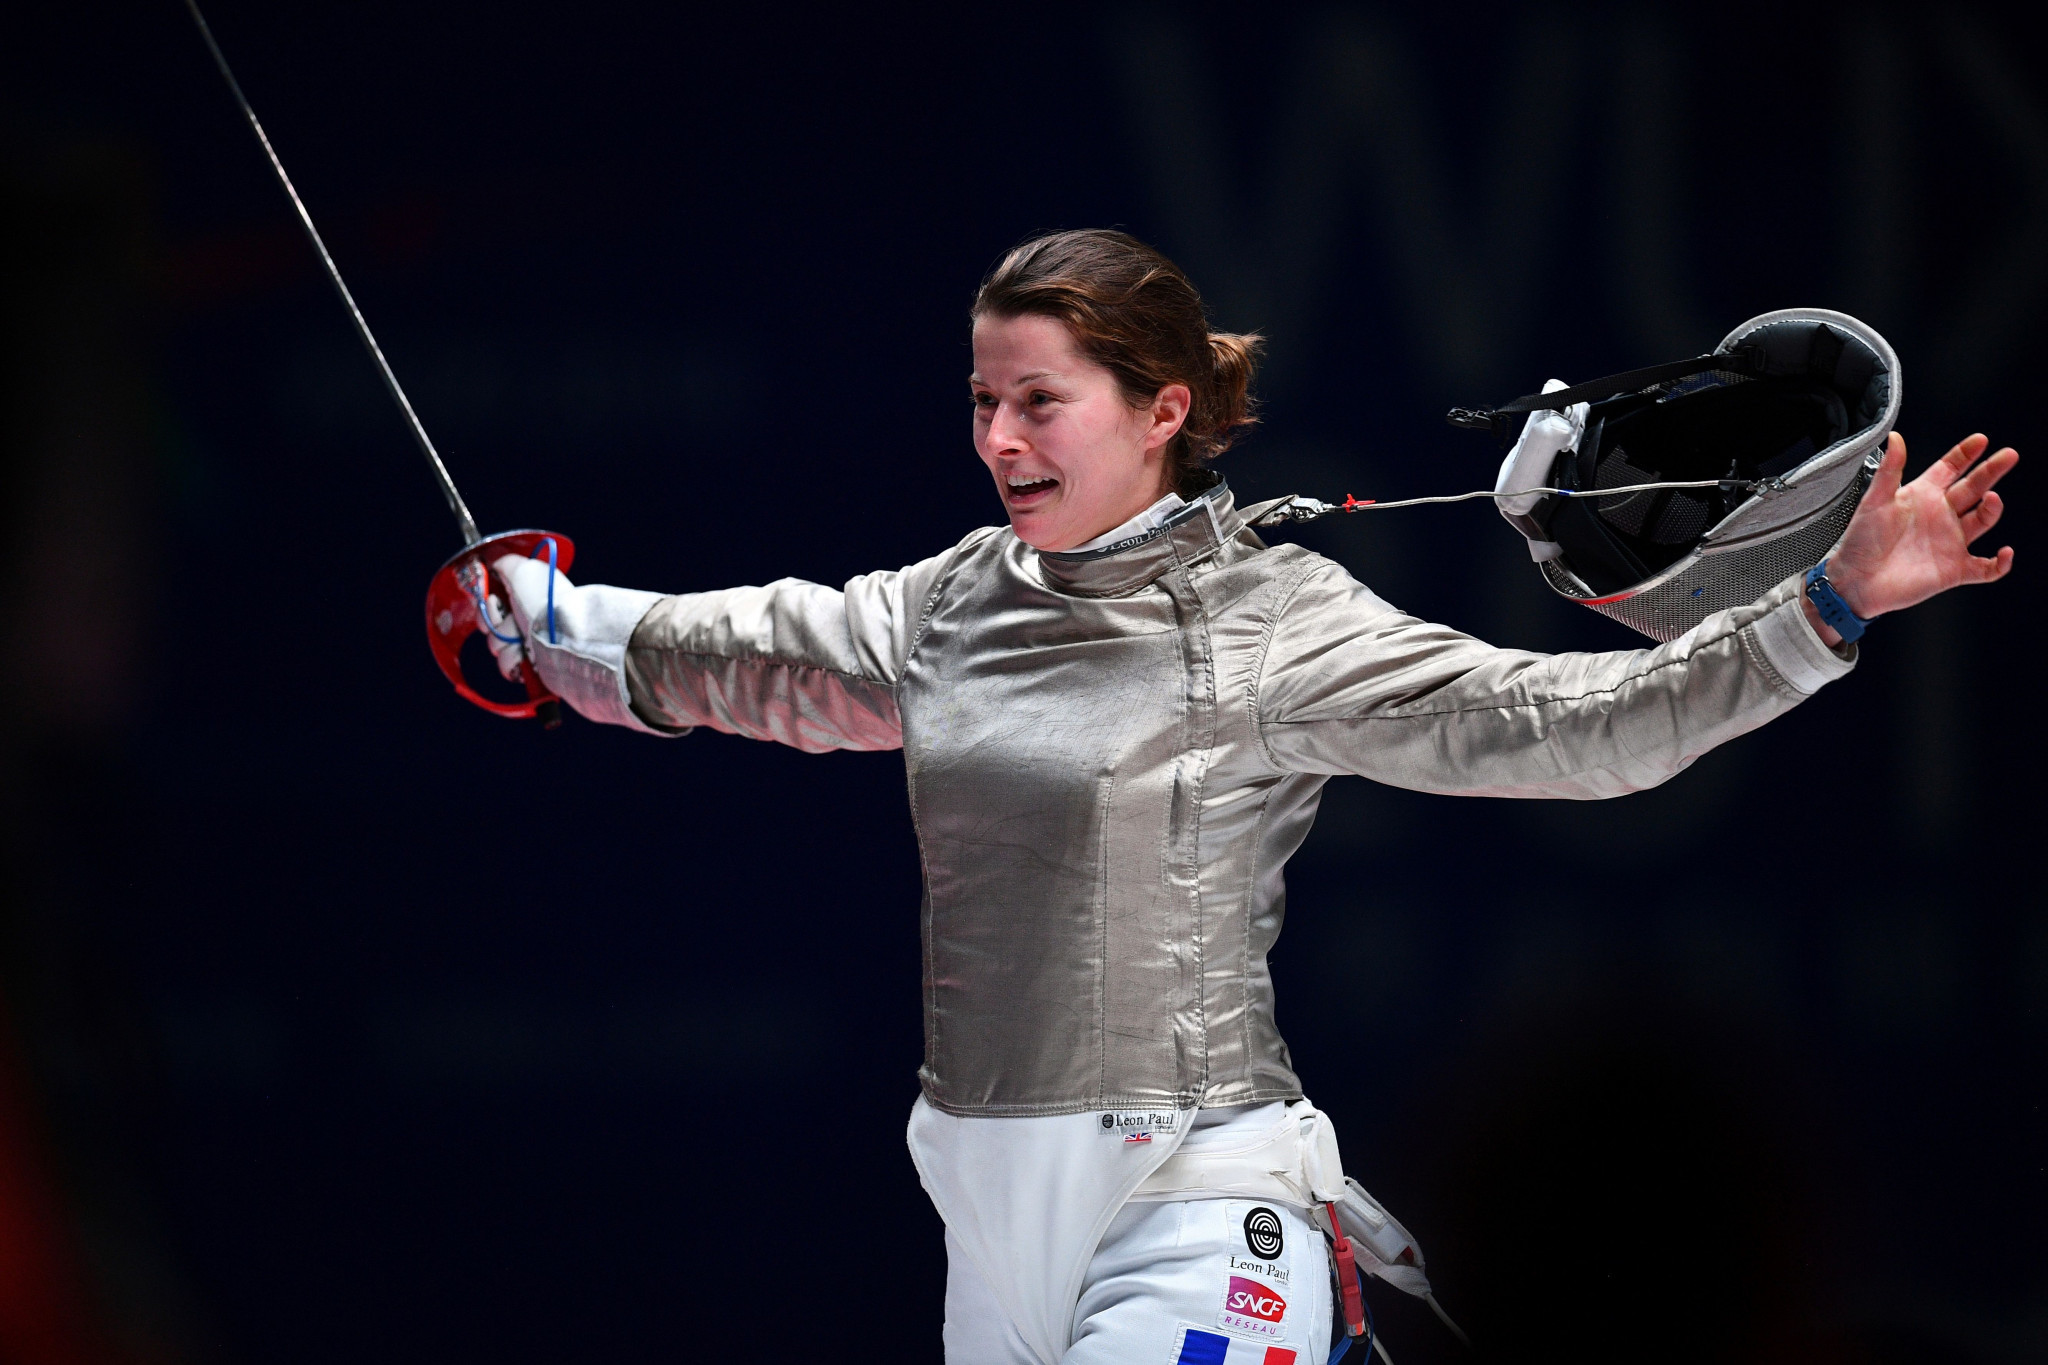 France's Cécilia Berder will bid for glory at the FIE Women's Sabre World Cup in Tunis tomorrow ©Getty Images